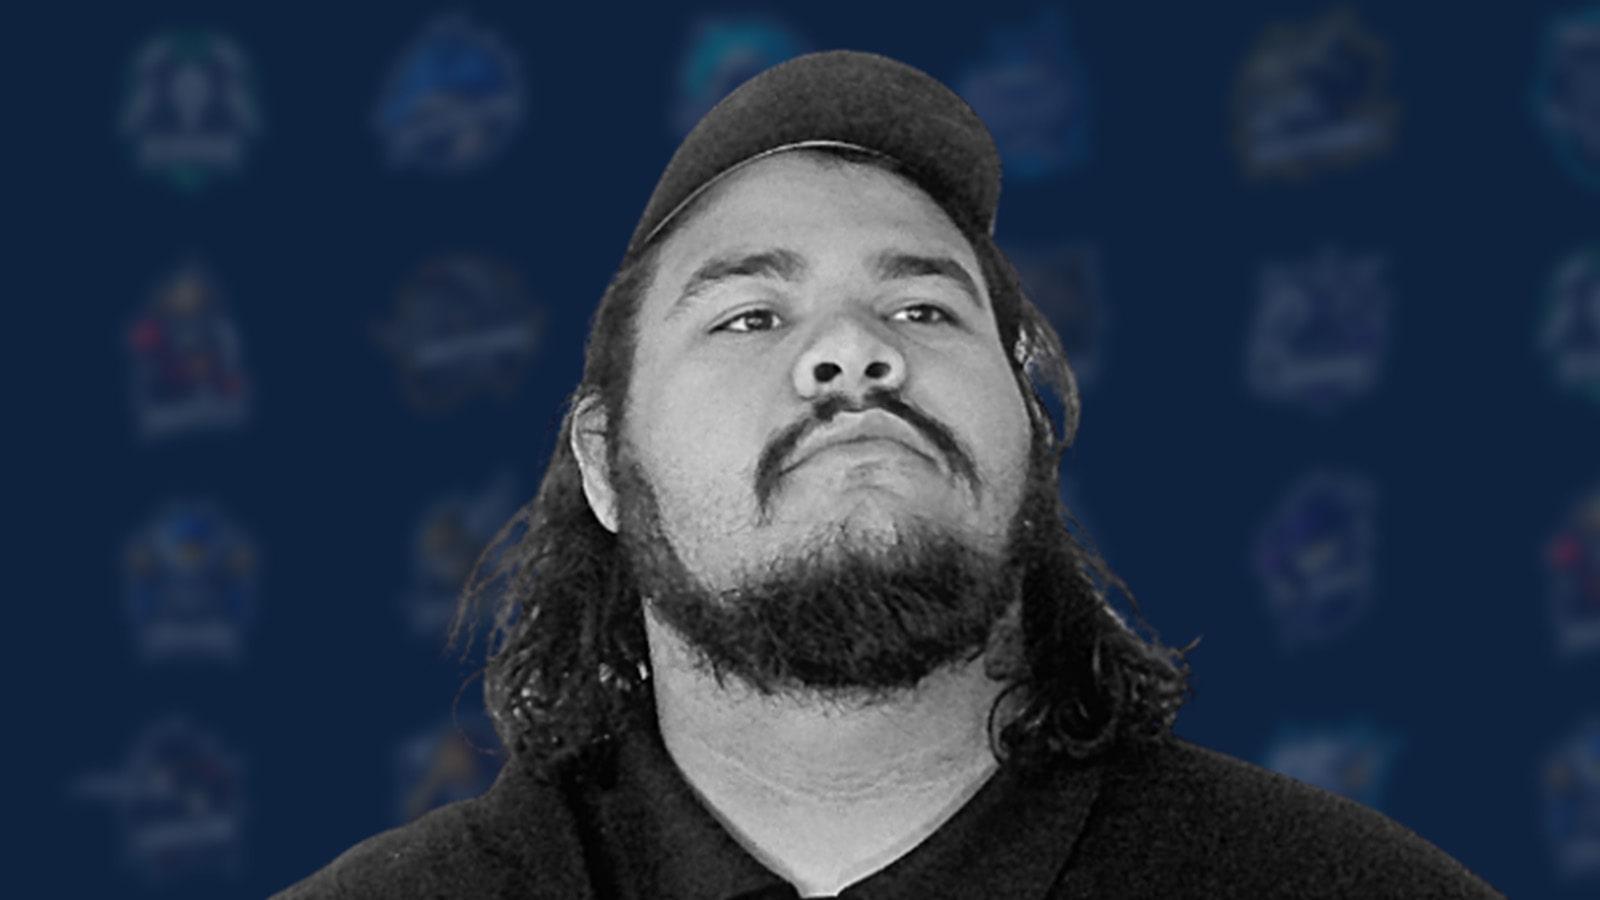 Chris “Fluffy” Aviles, a man with dark, shoulder-length hair and a black polo featuring the XP League logo against a blue backdrop featuring XP League branding.